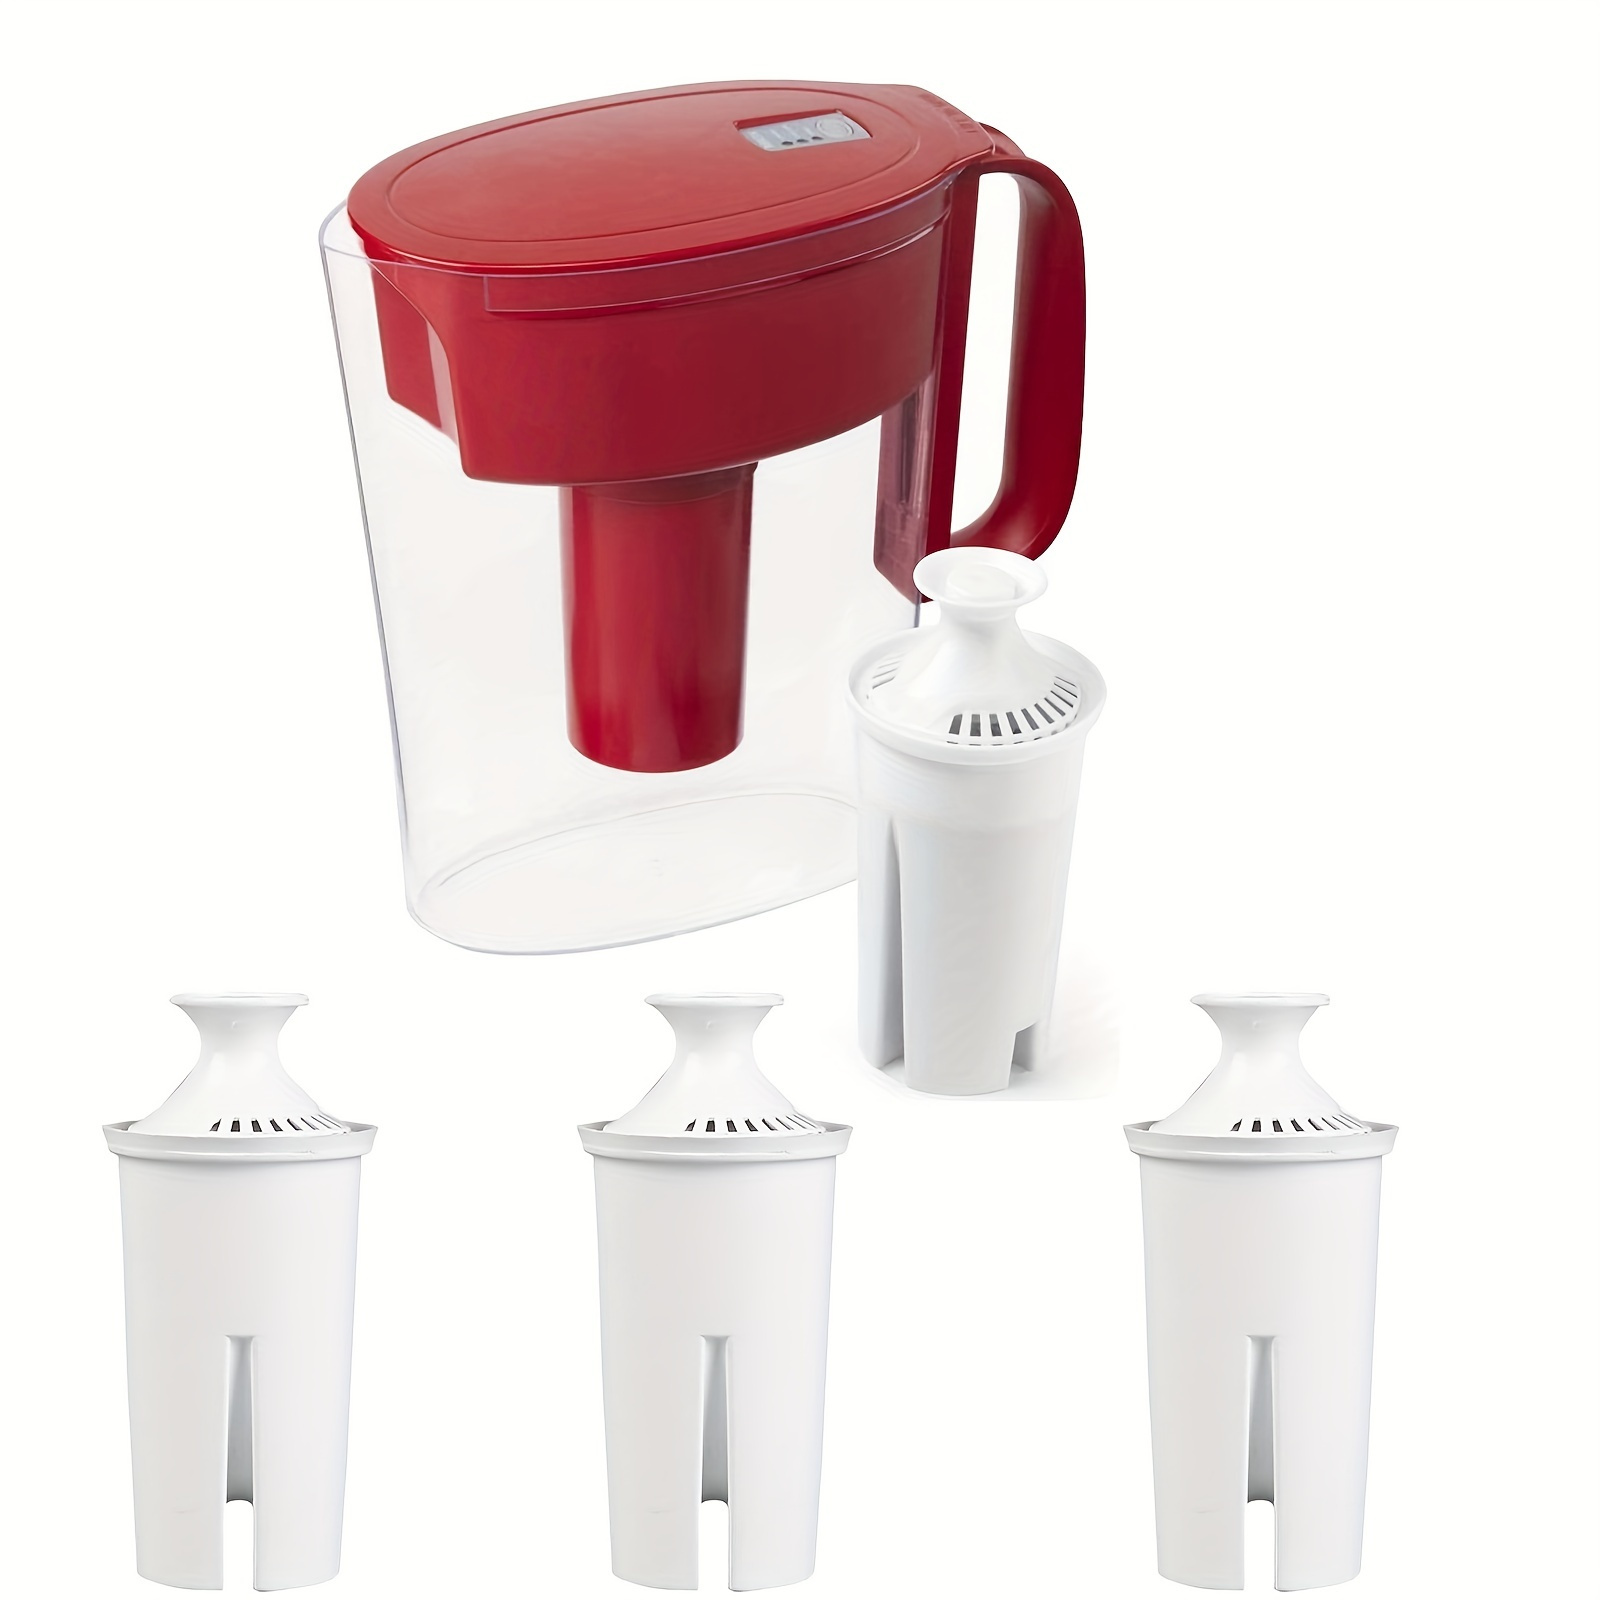  Brita Water Filter Pitcher for Tap and Drinking Water with 1  Standard Filter, Lasts 2 Months, 6-Cup Capacity, Christmas Gift for Men and  Women, BPA Free, Red: Home & Kitchen